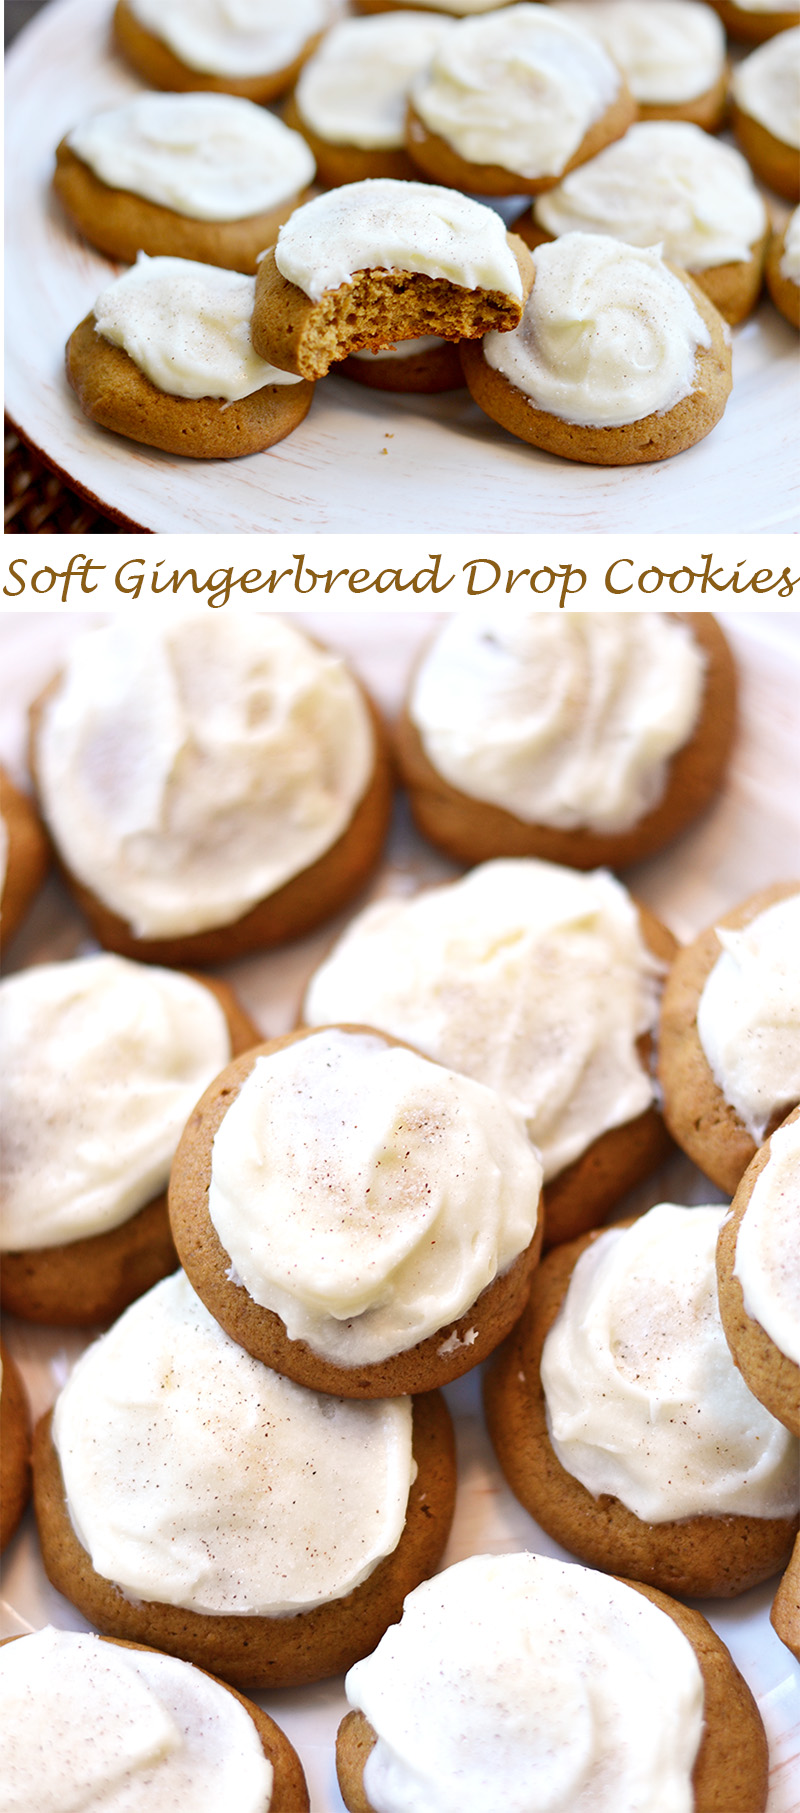 Soft Gingerbread Drop Cookies with Cream Cheese Frosting | ImPECKable Eats